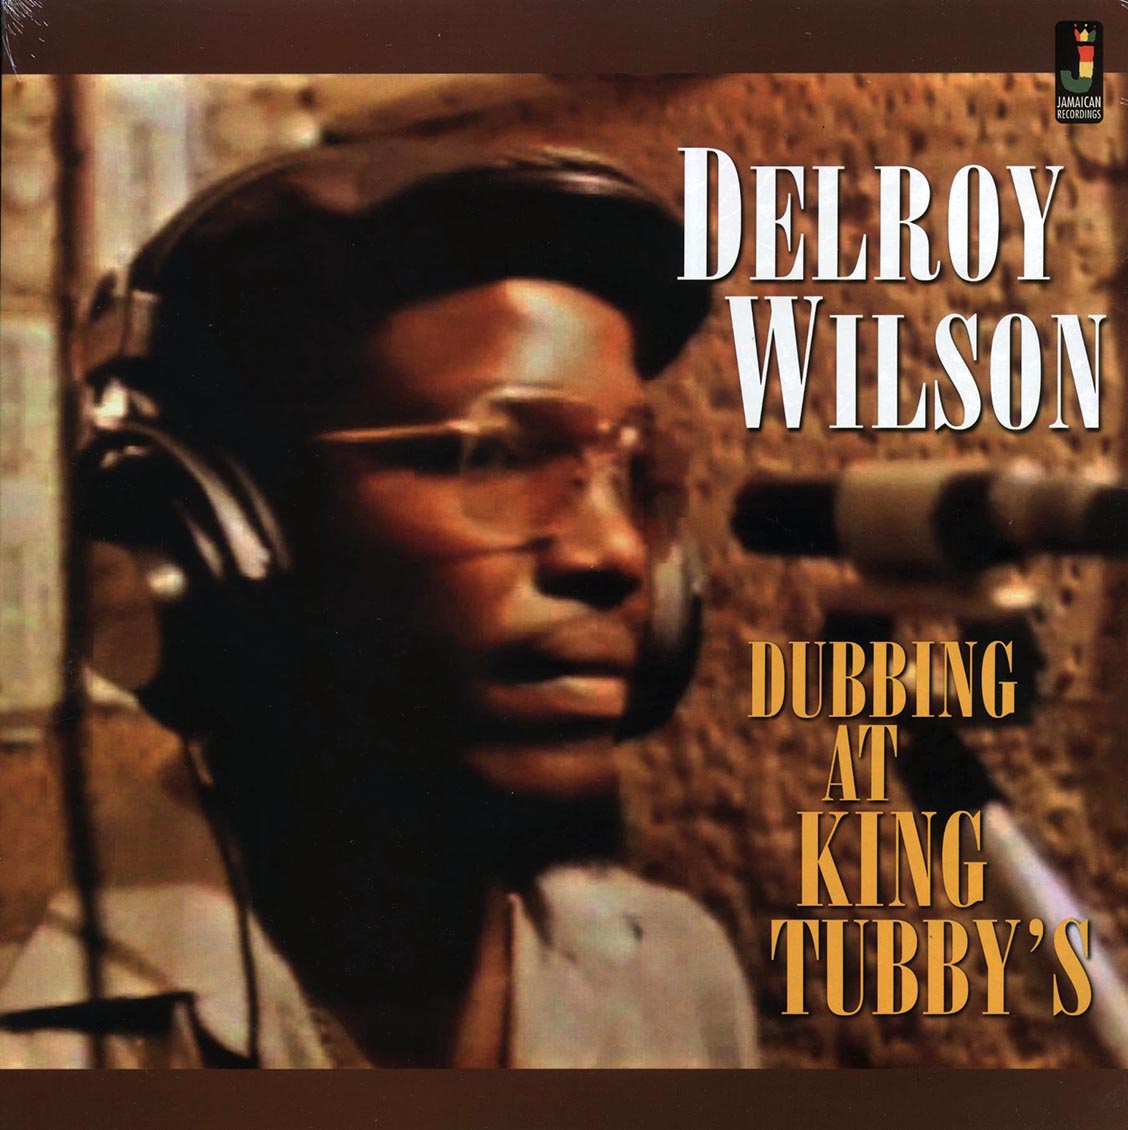 King Tubby - Delroy Wilson Dubbing At King Tubby's